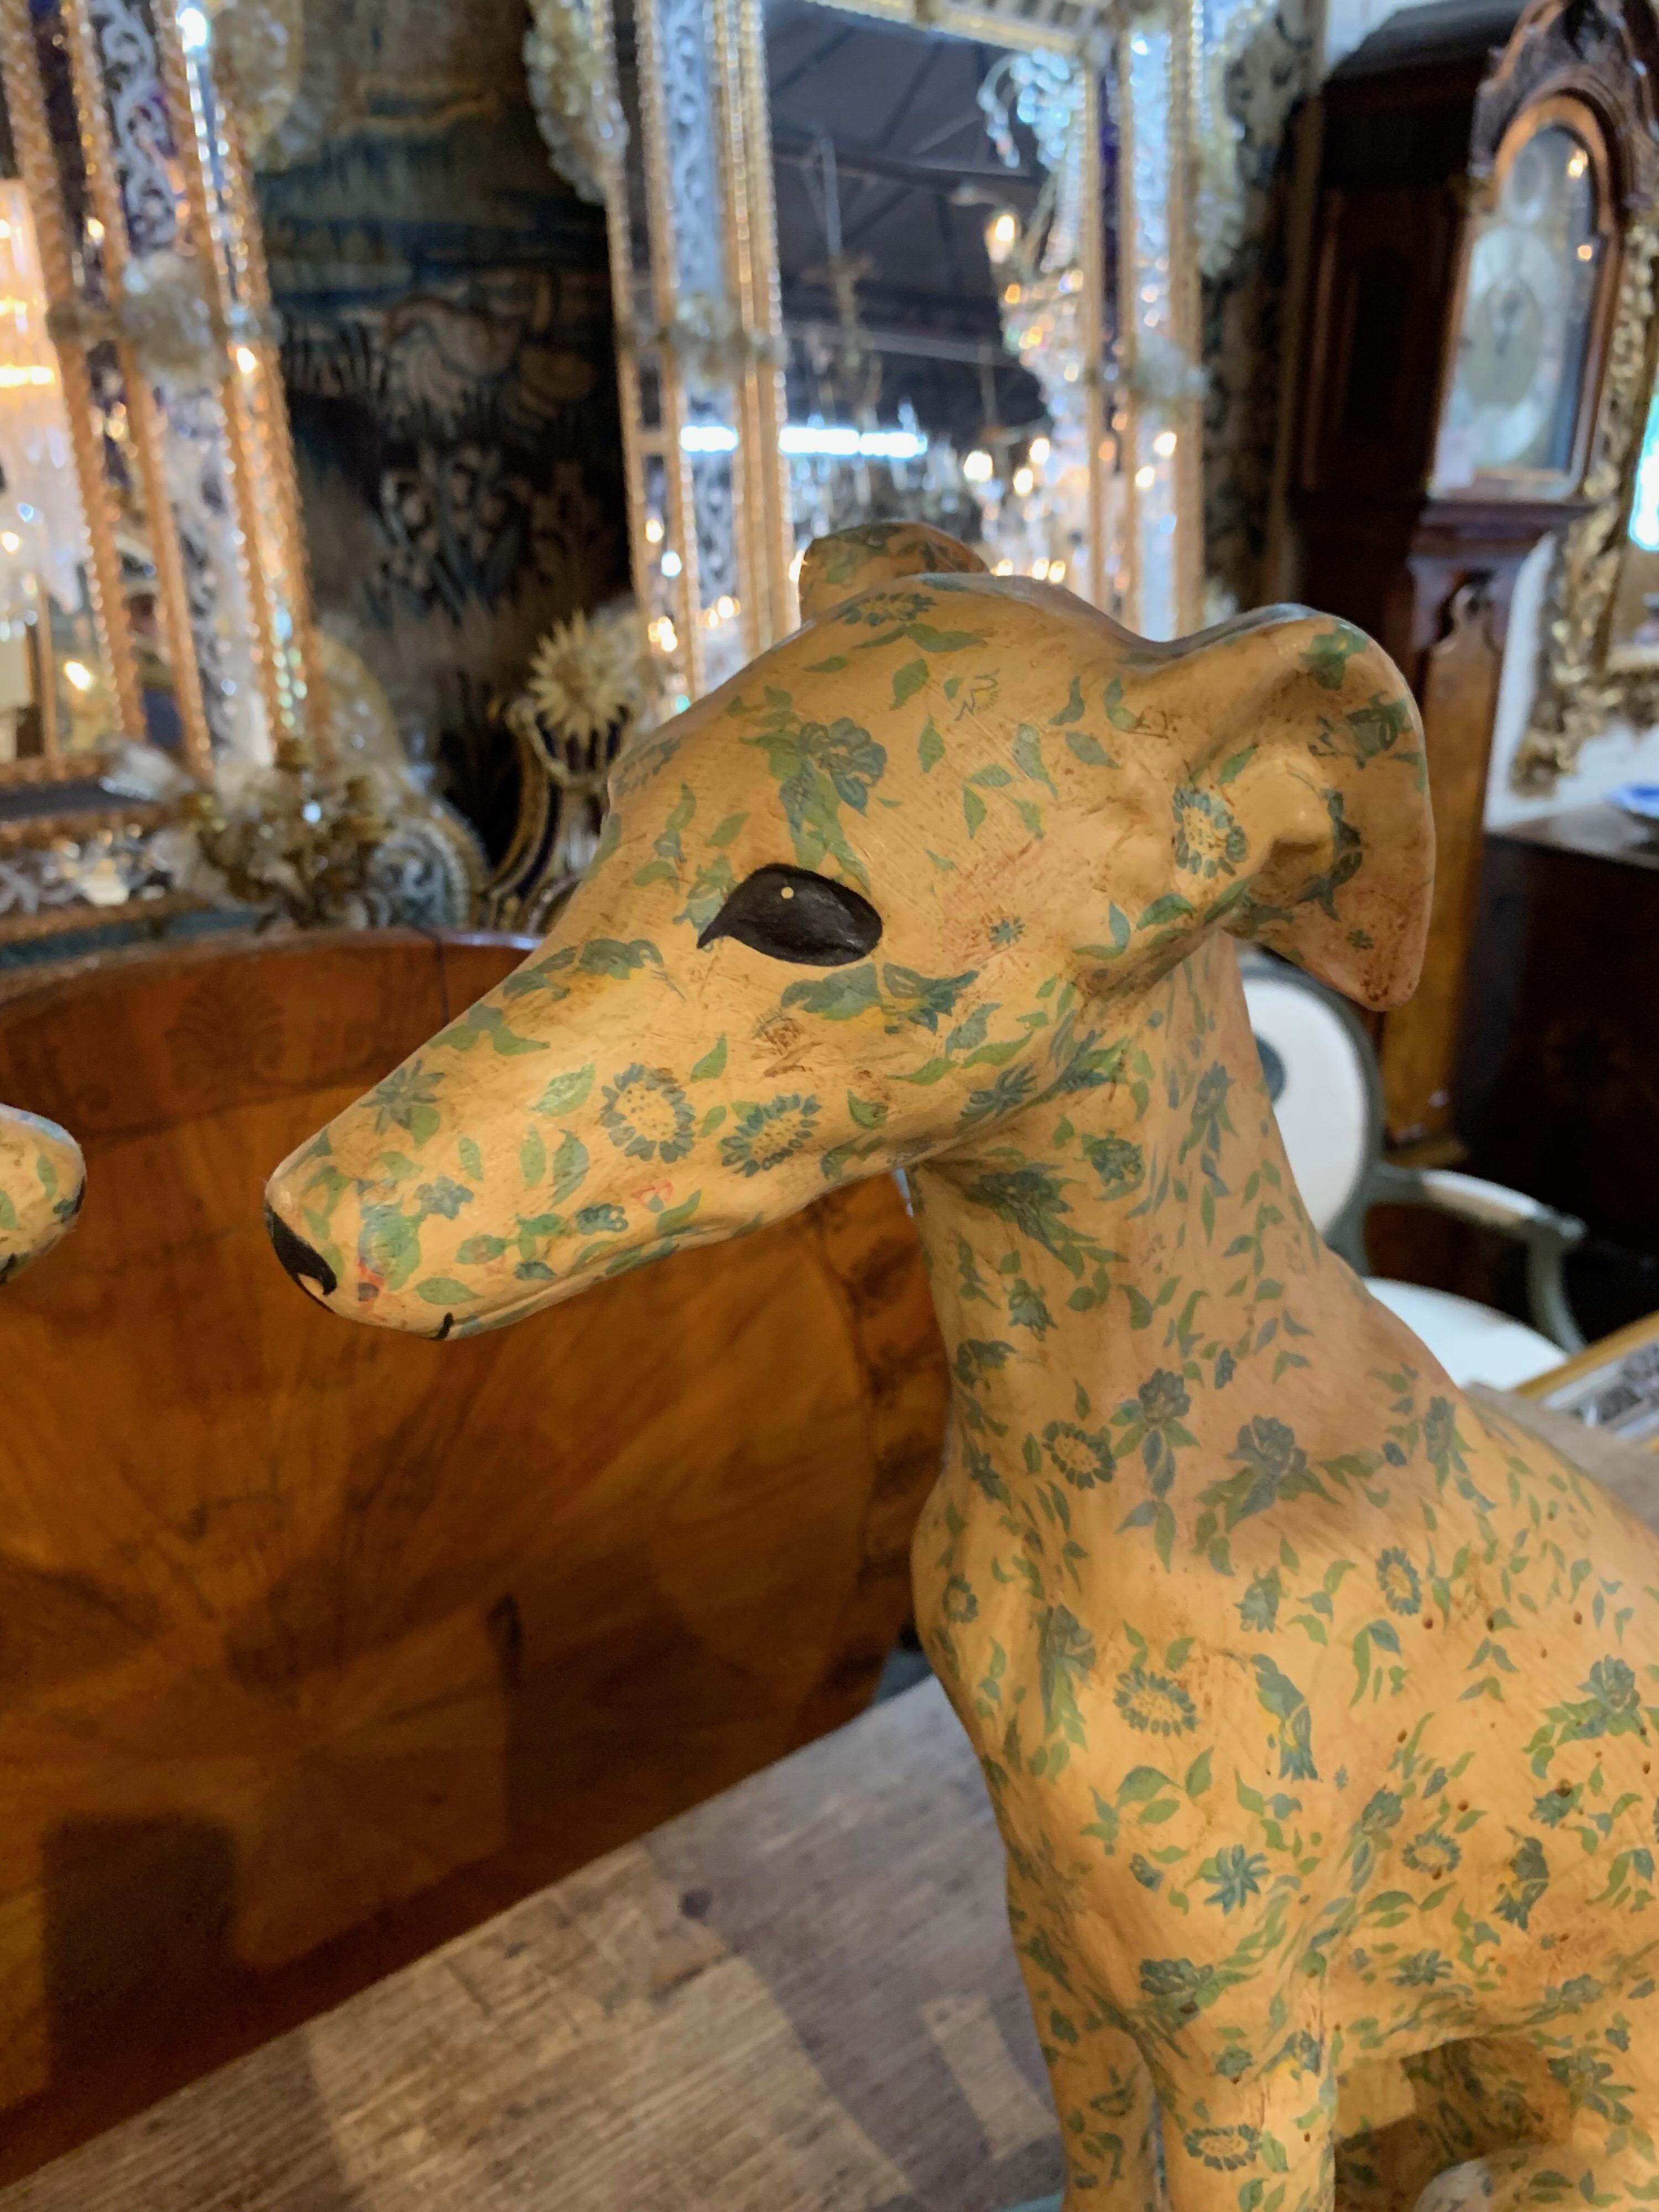 Very nice pair of terracotta whippets. They are hand painted in a floral pattern with blue and rose colored flowers. Great quality and detail on these whimsical items!